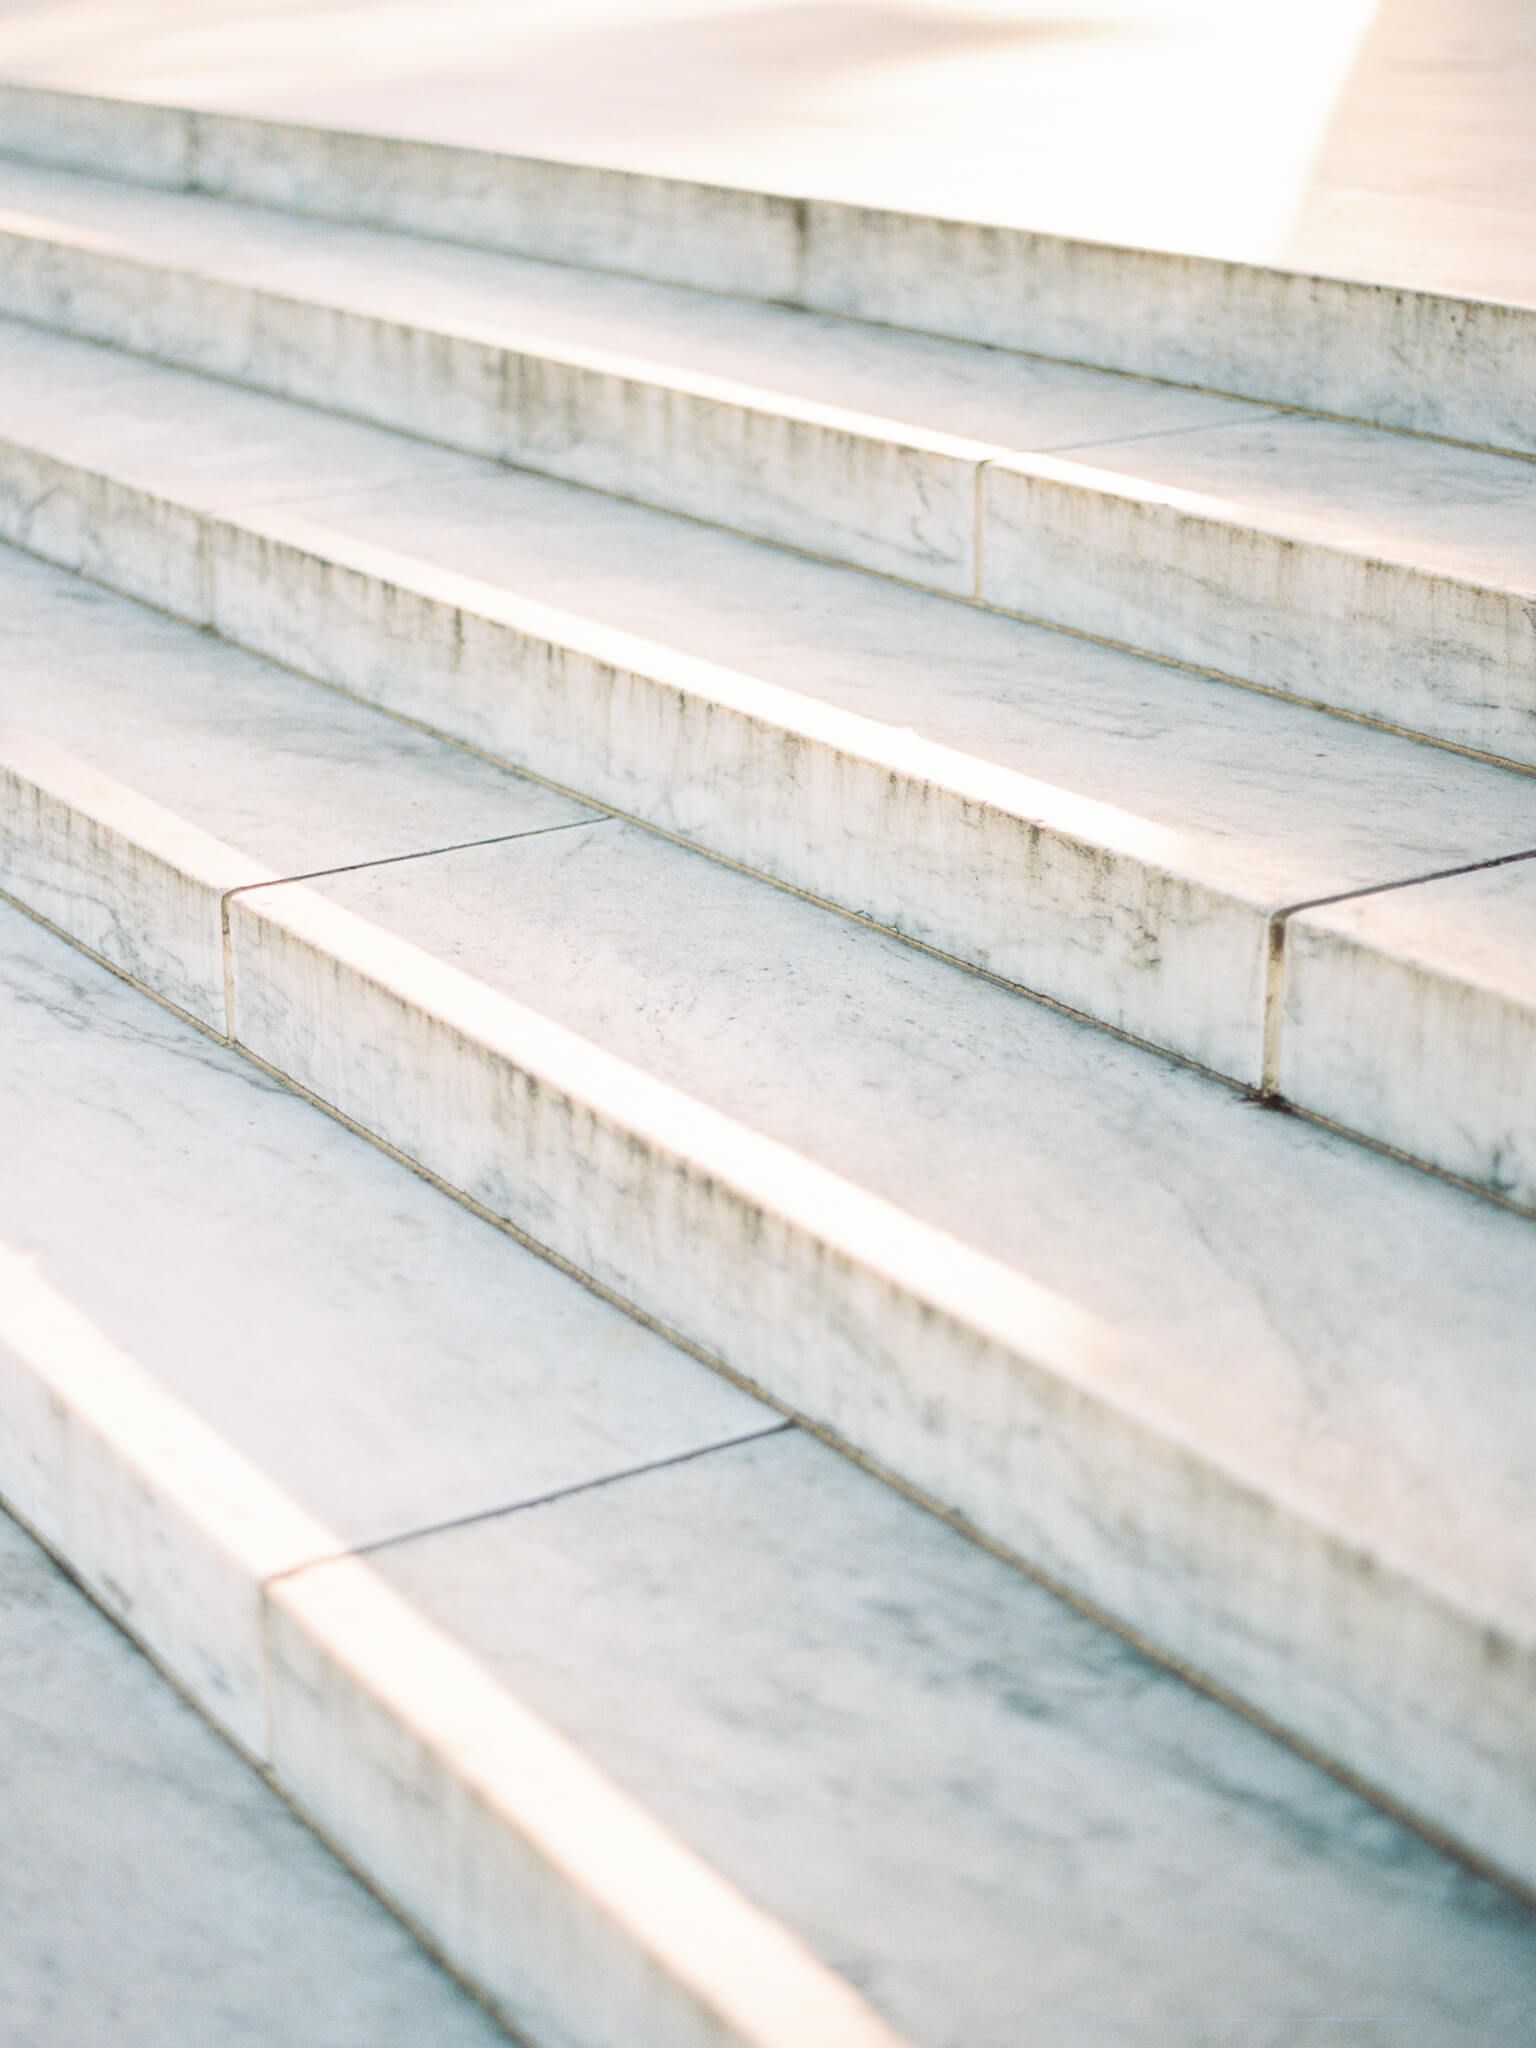 The marble steps of the Jefferson Memorial glowing in early morning light